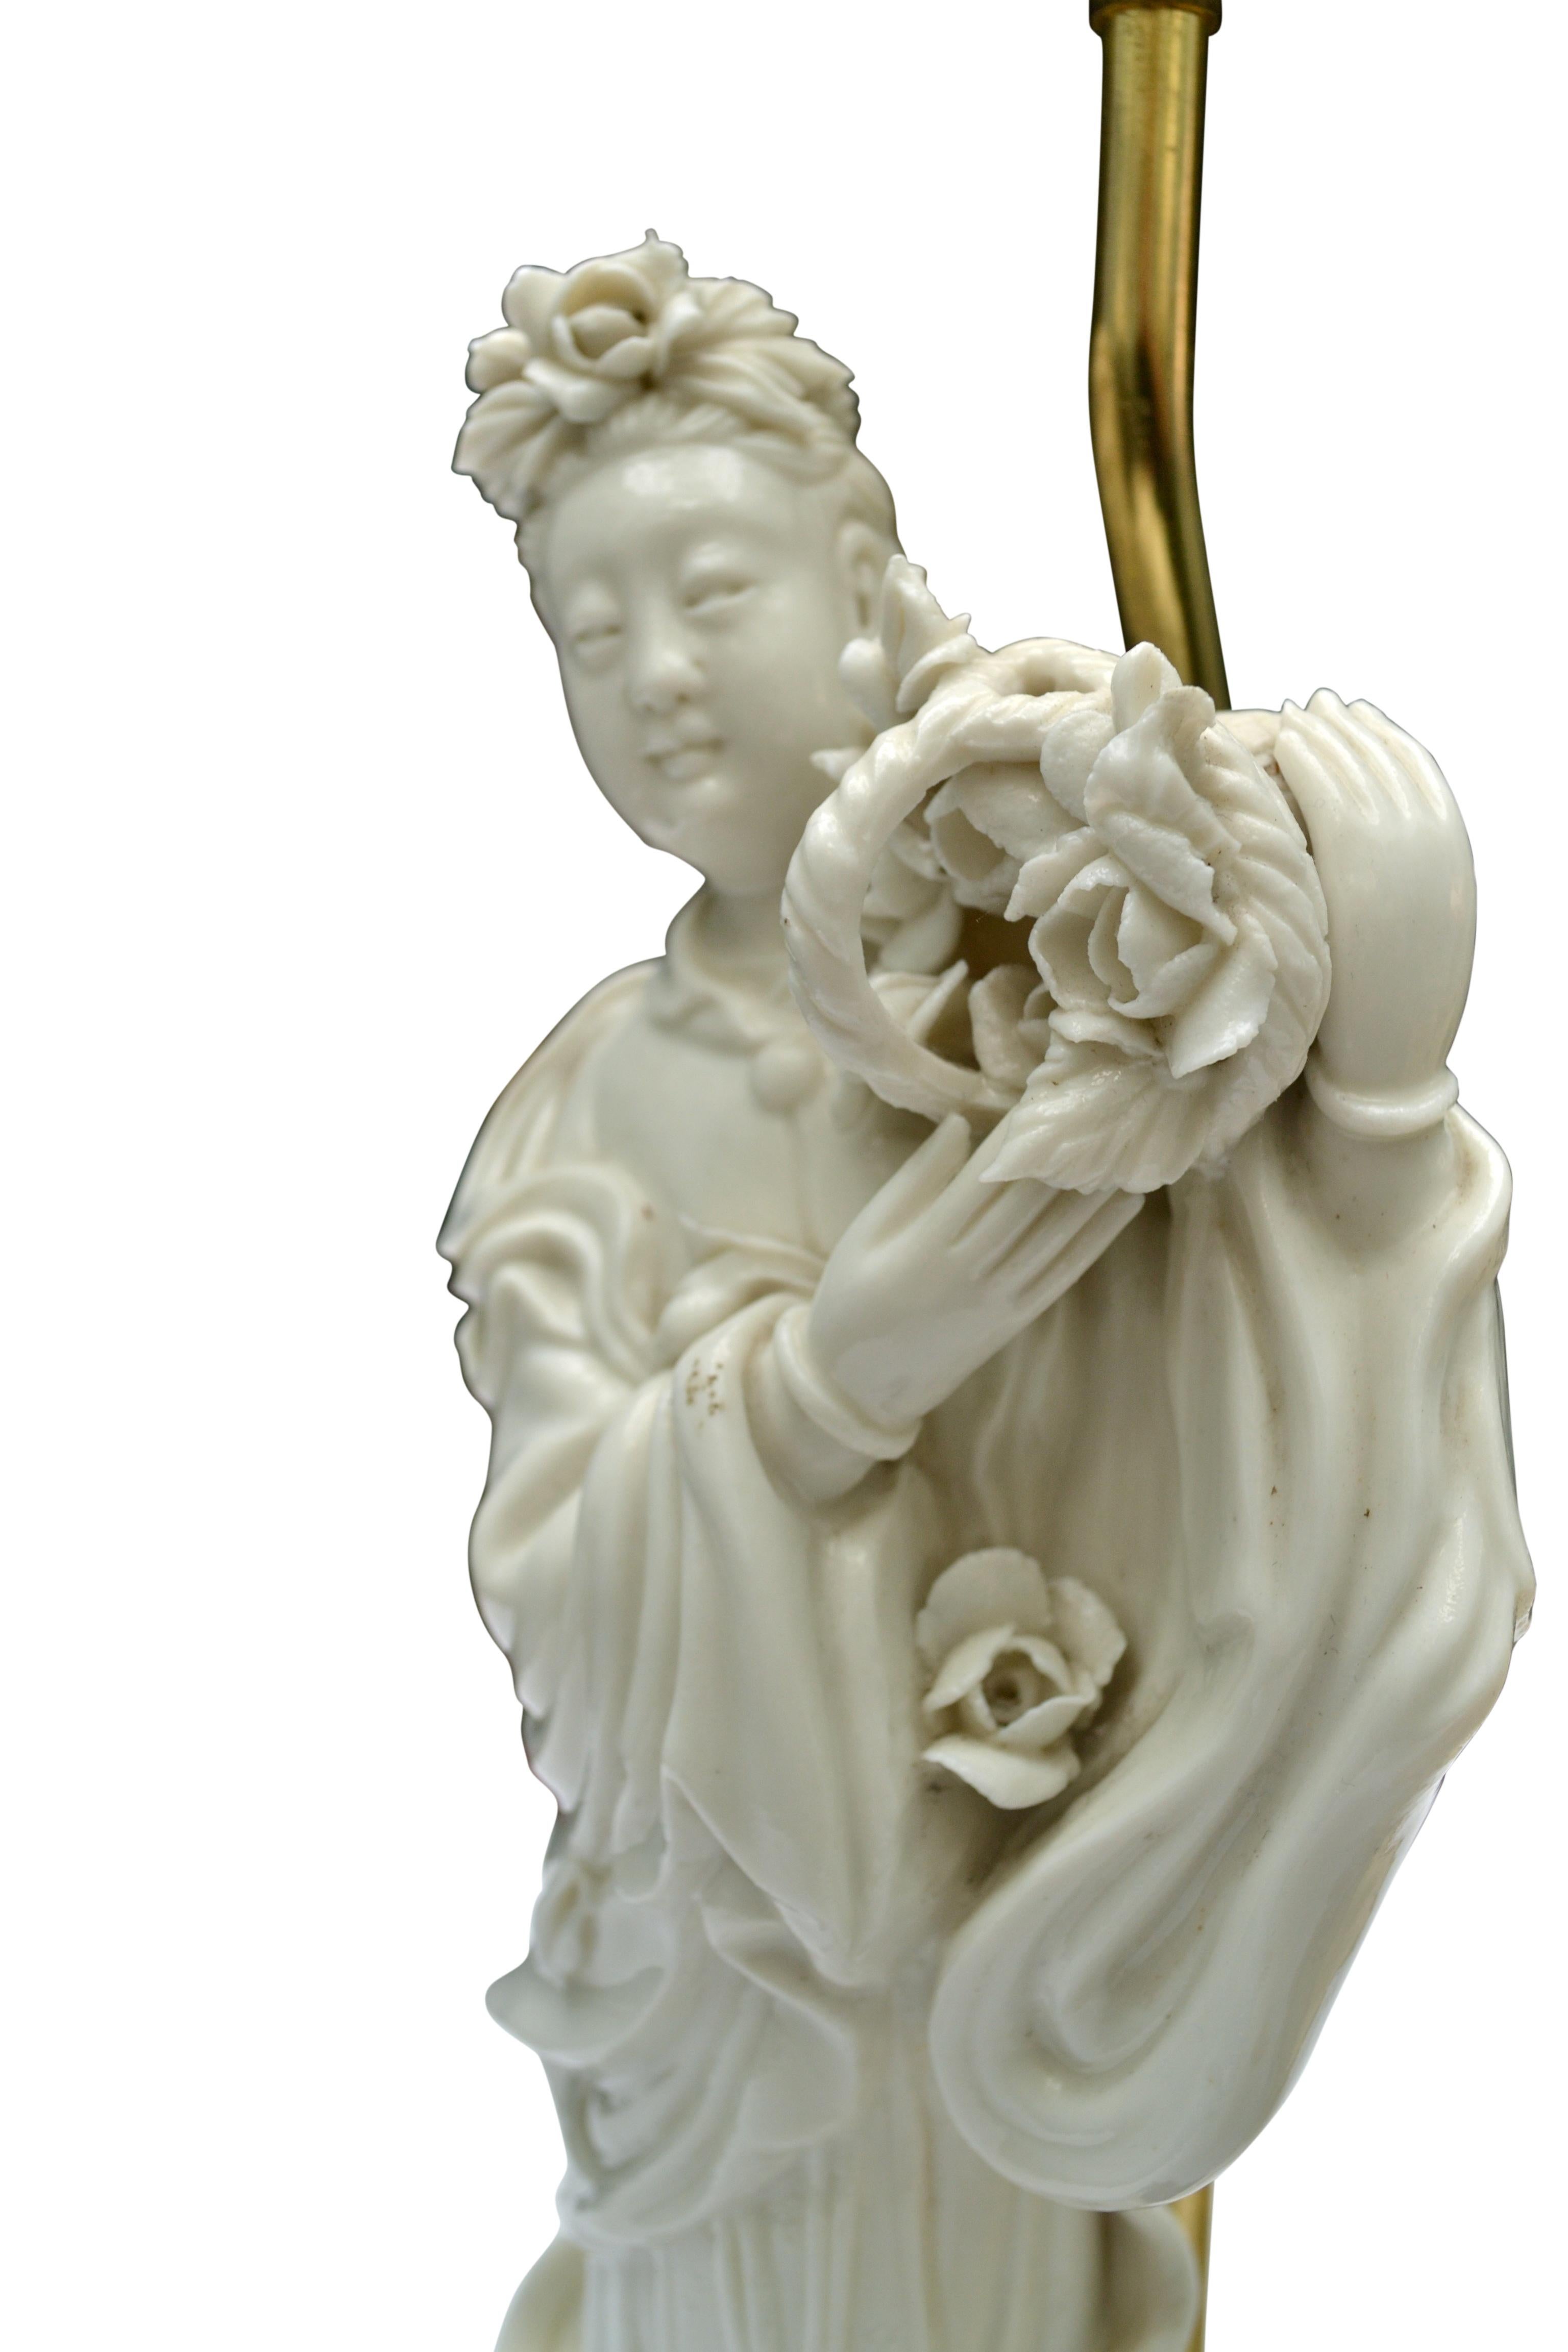 Chinese Export Figural Blanc De Chine Lamp of Quan Yin with an Silk Lotus Flower Shade